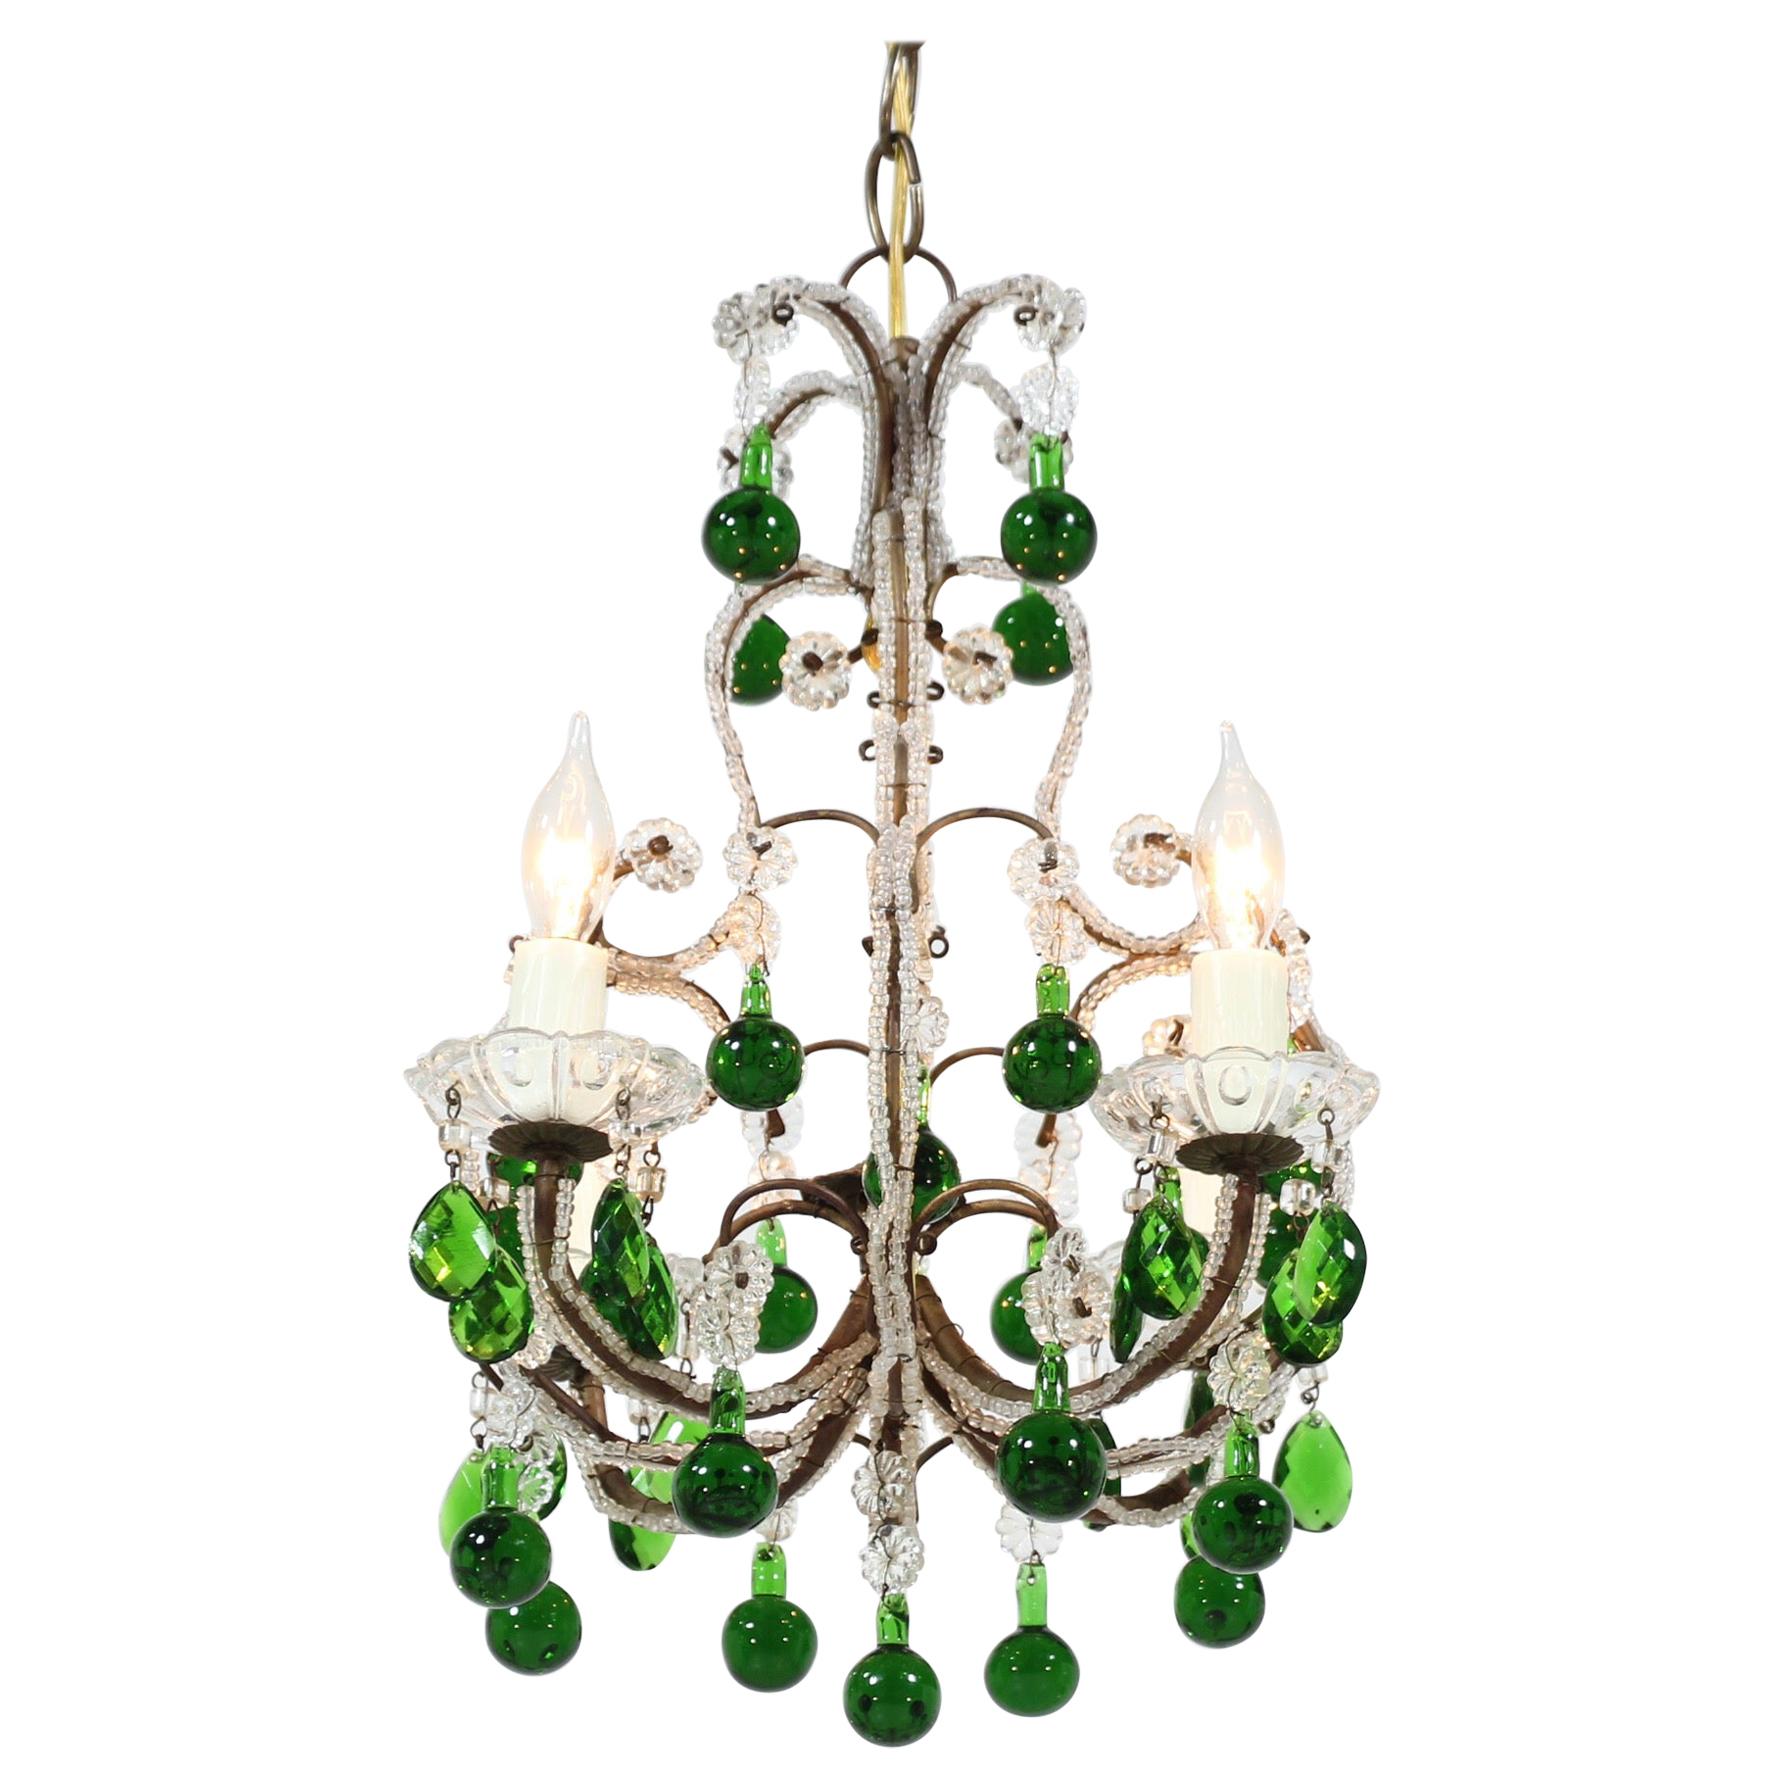 Italian Crystal Beaded Chandelier with Green Drops